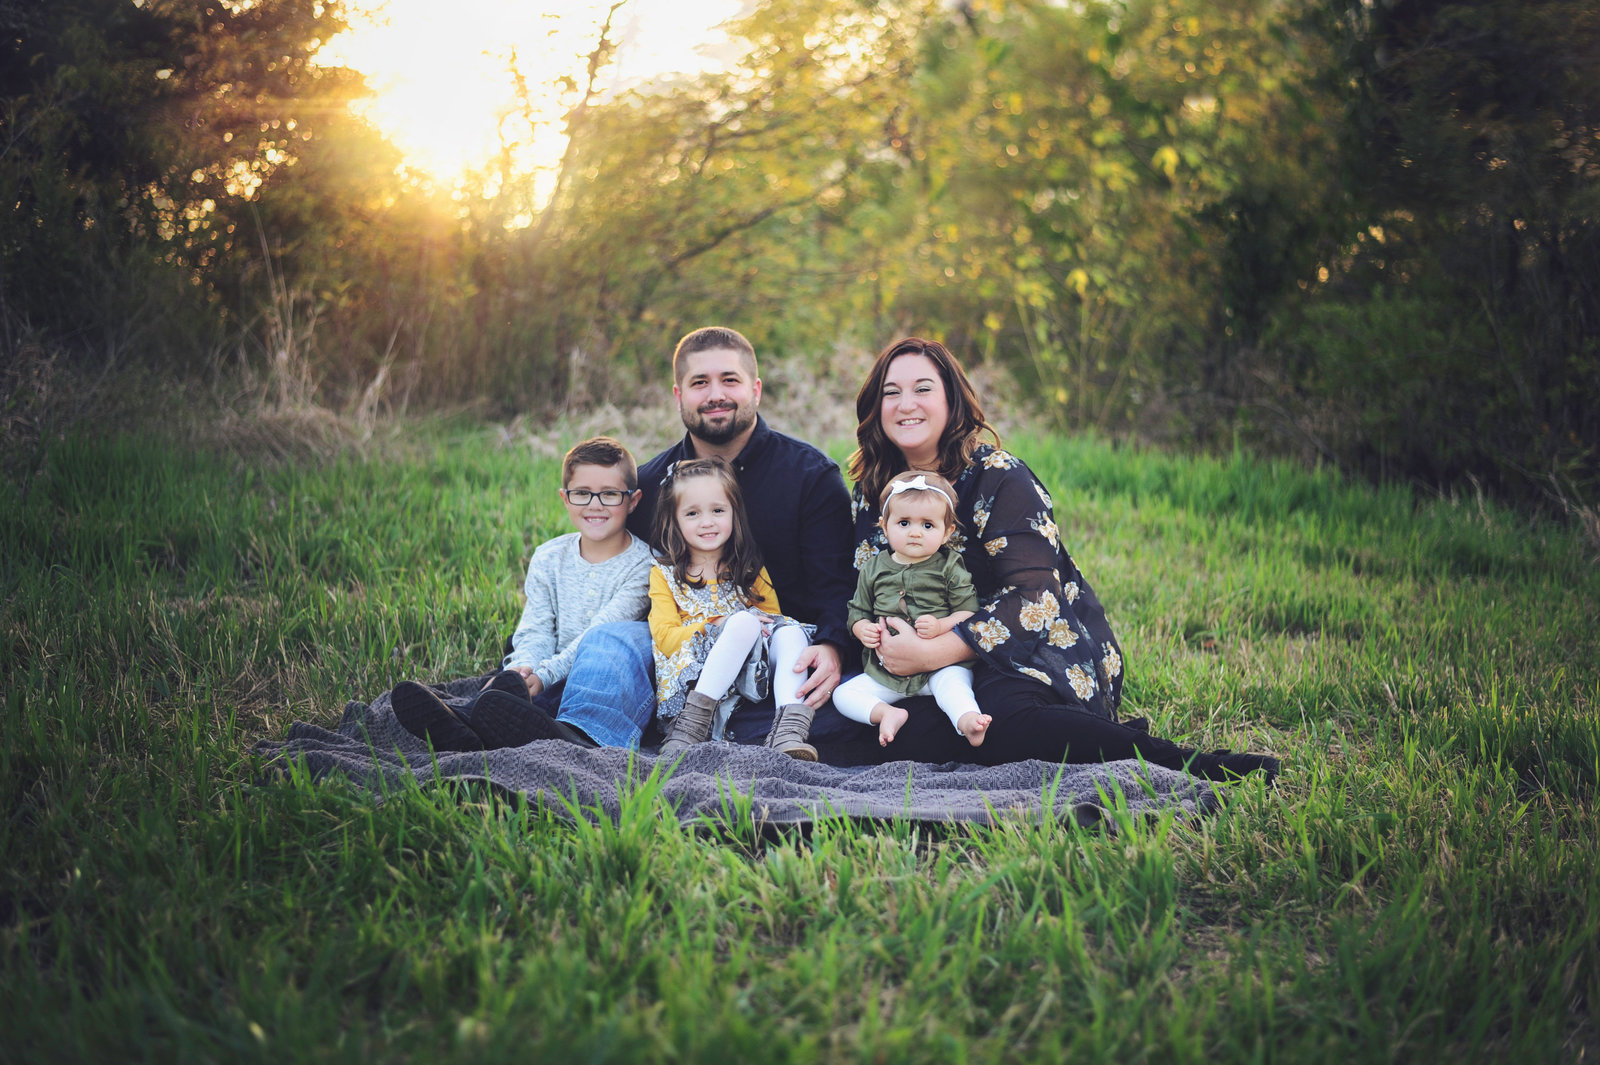 Family portraits at sunset in Forsyth, IL